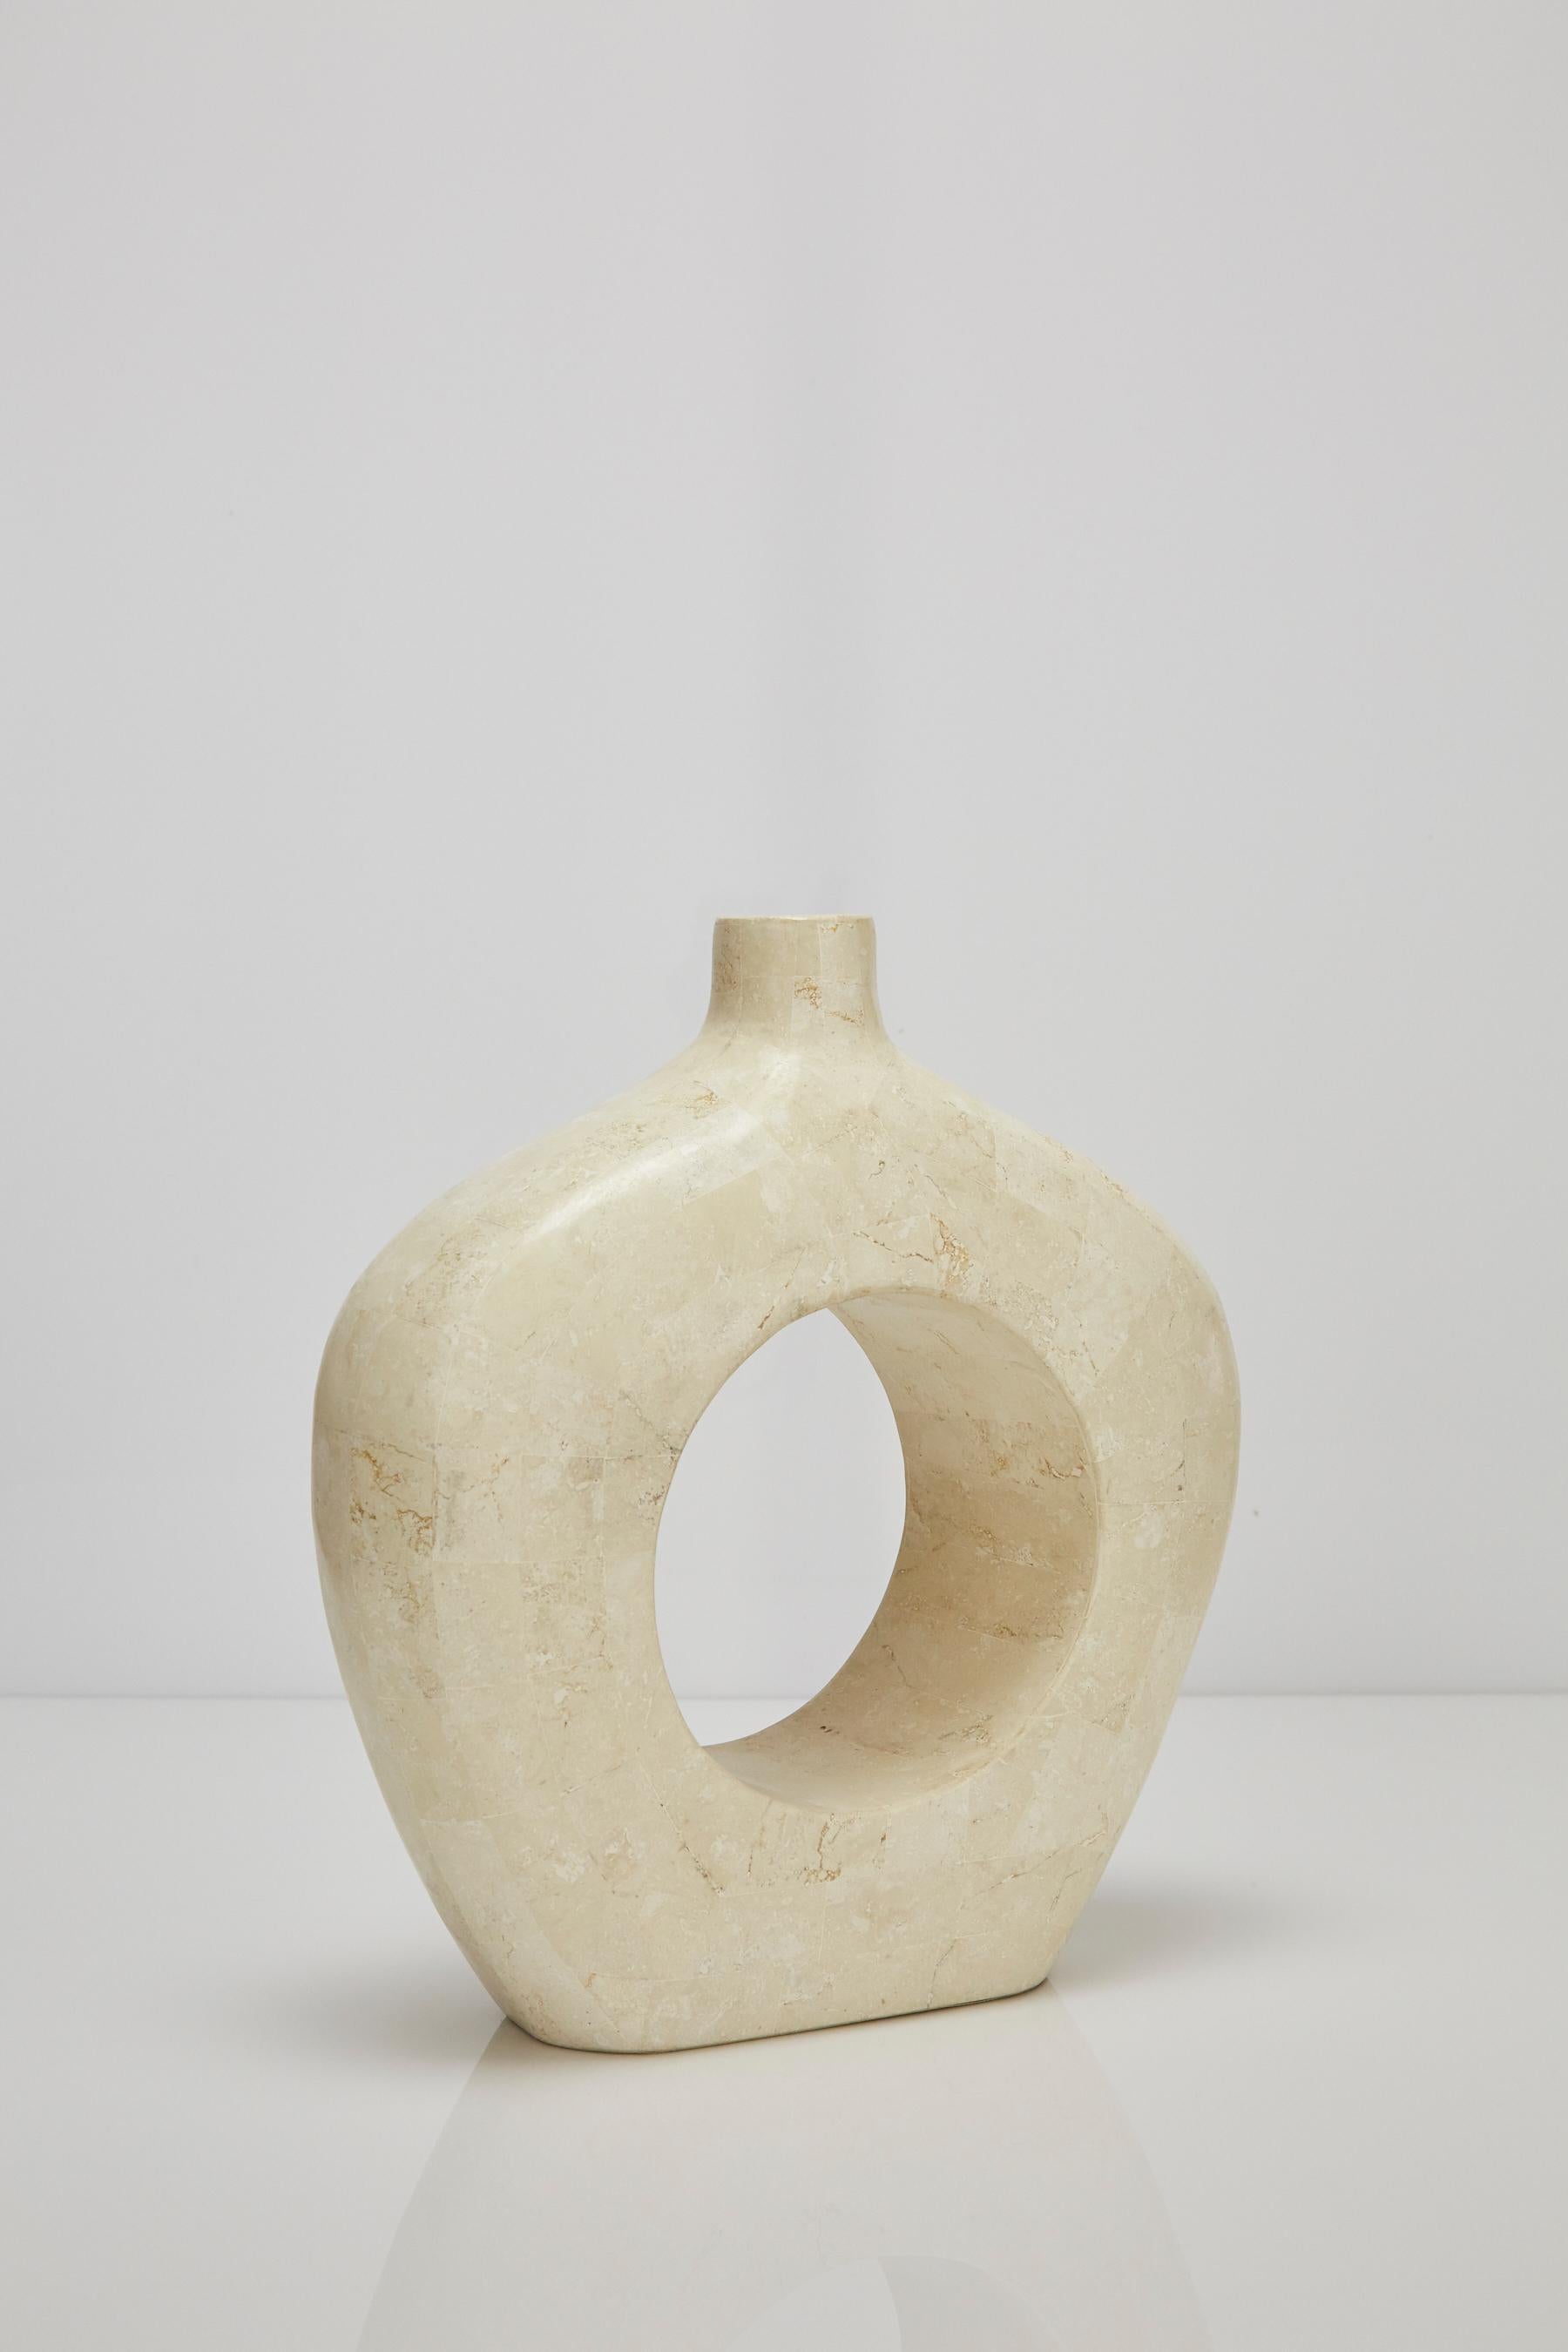 Shorter vase with O-shaped centre void. Executed in white ivory tessellated stone over a fiberglass body.

All furnishings are made from 100% natural Fossil Stone or Seashell inlay, carefully hand cut and crafted piece-by-piece and precisely inlaid